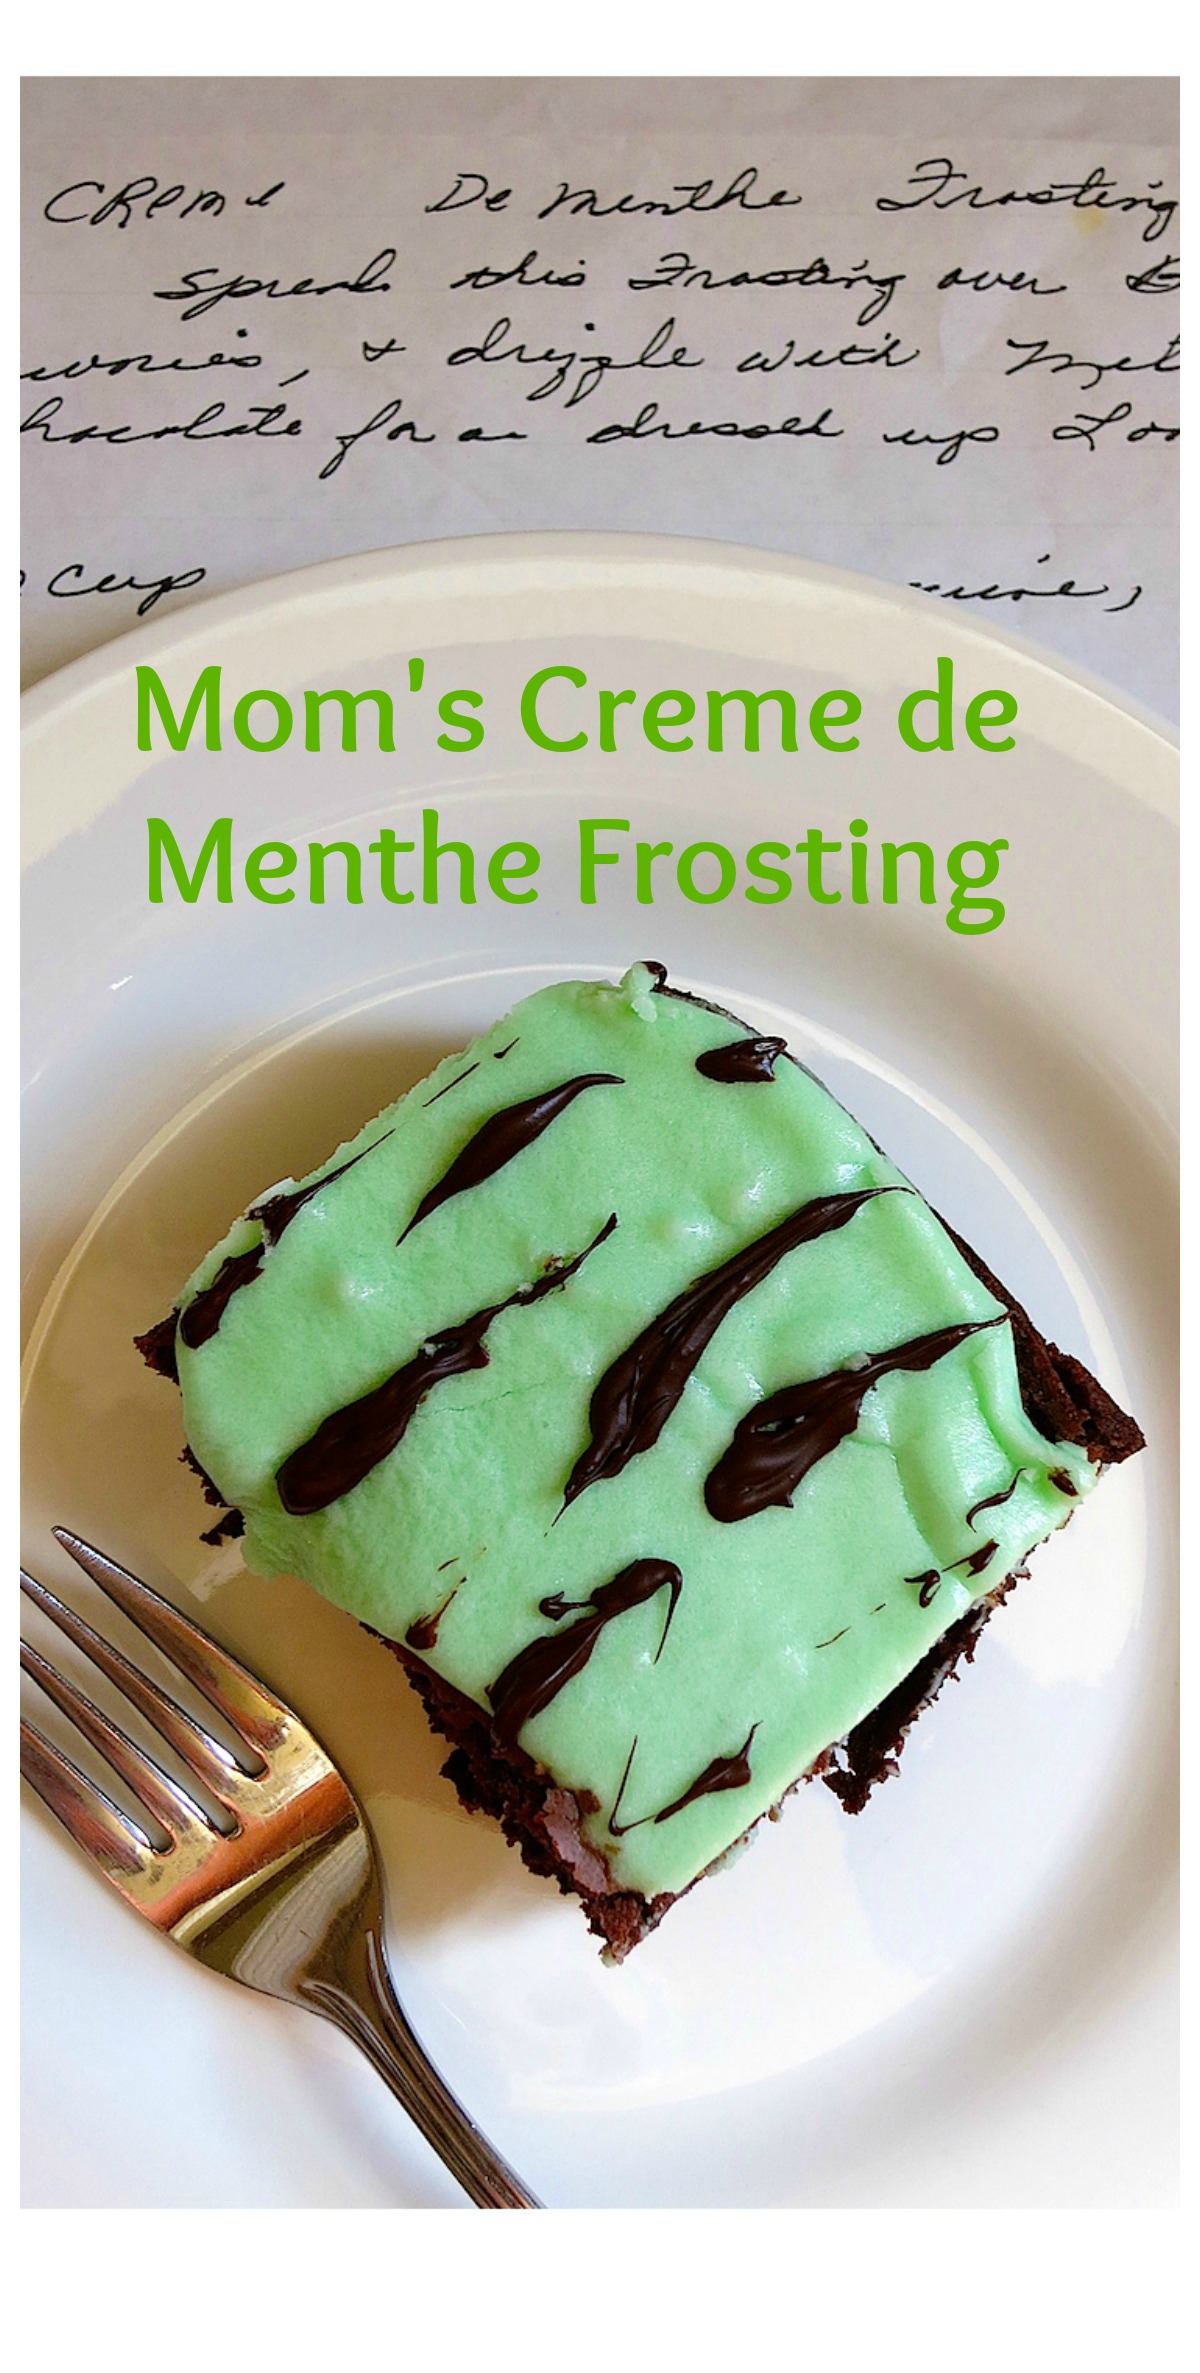 Family recipe swap for Mother's Day - Mom's Creme de Menthe Frosting. creamy and delicious!